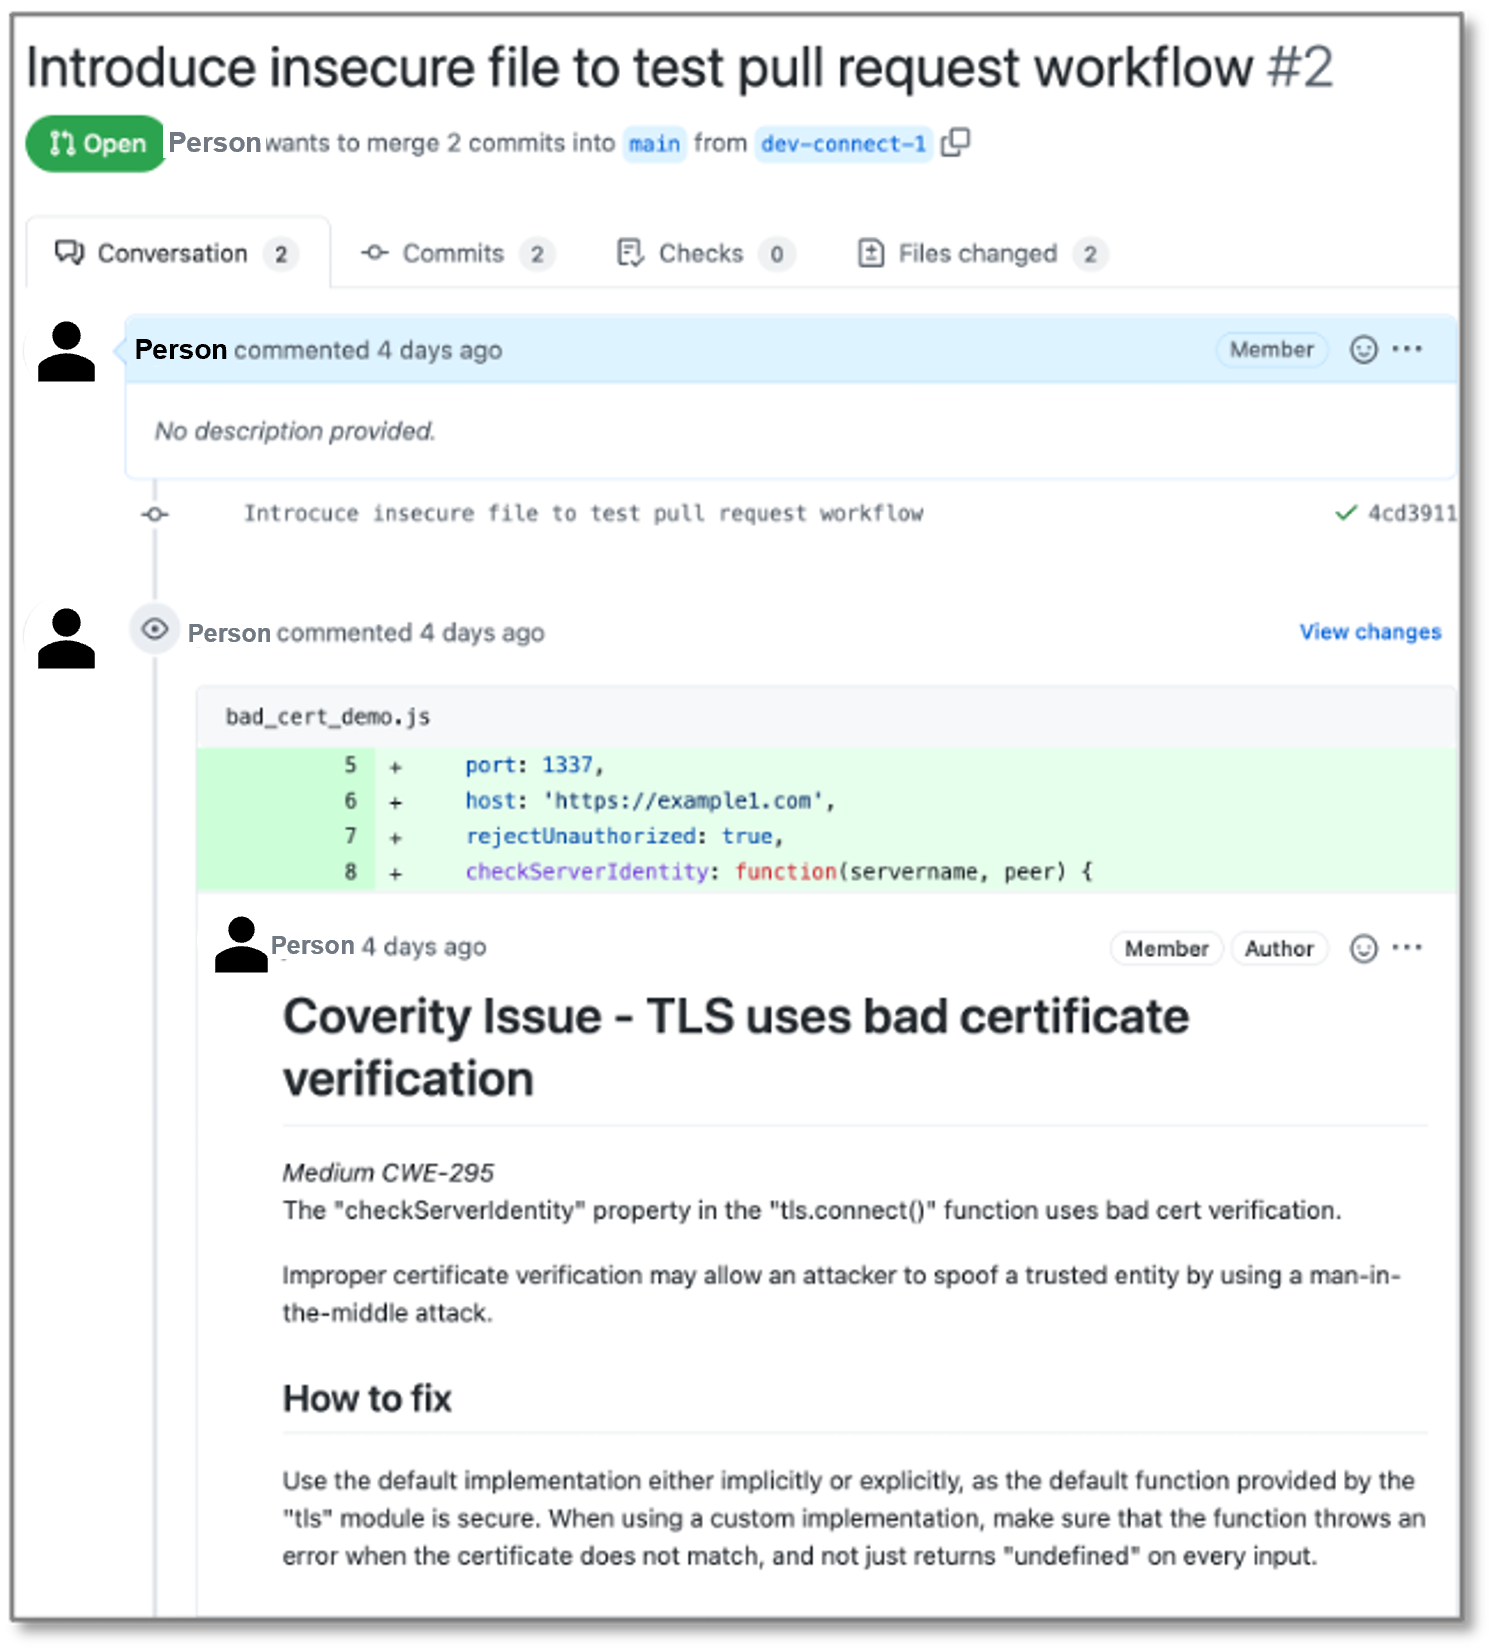 Synopsys testing tool results in GitHub pull requests | Synopsys